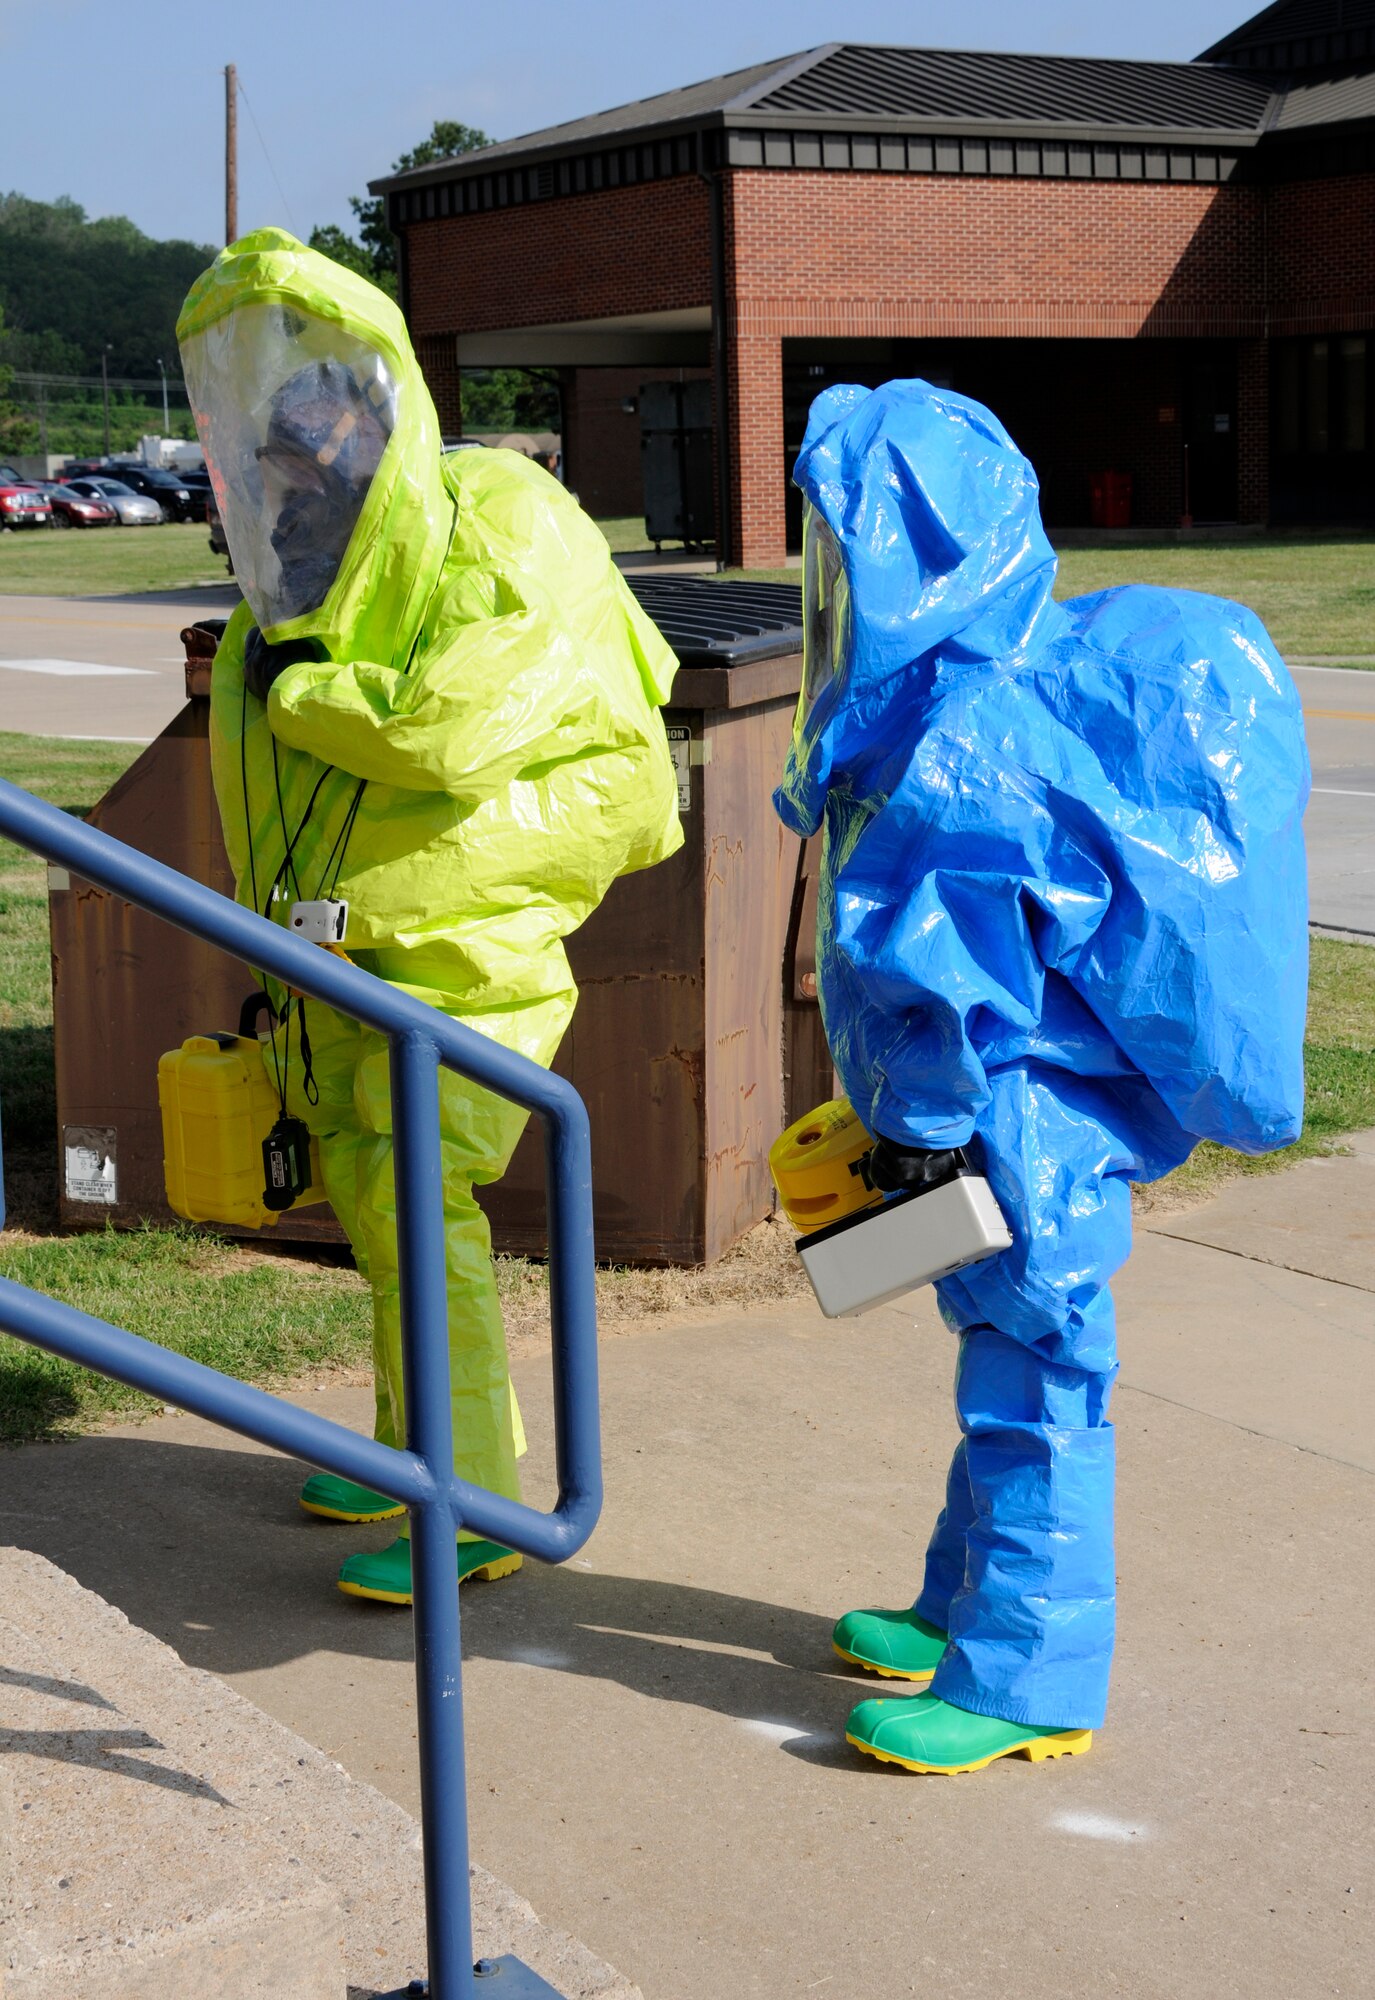 Members of the 188th Fighter Wing participate in a chemical, biological, radiological, nuclear, environmental (CBRNE) exercise at Ebbing Air National Guard base, Fort Smith, Ark.  The exercise was in response to a substance found in an envelope in the mailroom on base. (U.S. Air National Guard photo by Airman 1st Class Cody Martin/188th Fighter Wing Public Affairs)